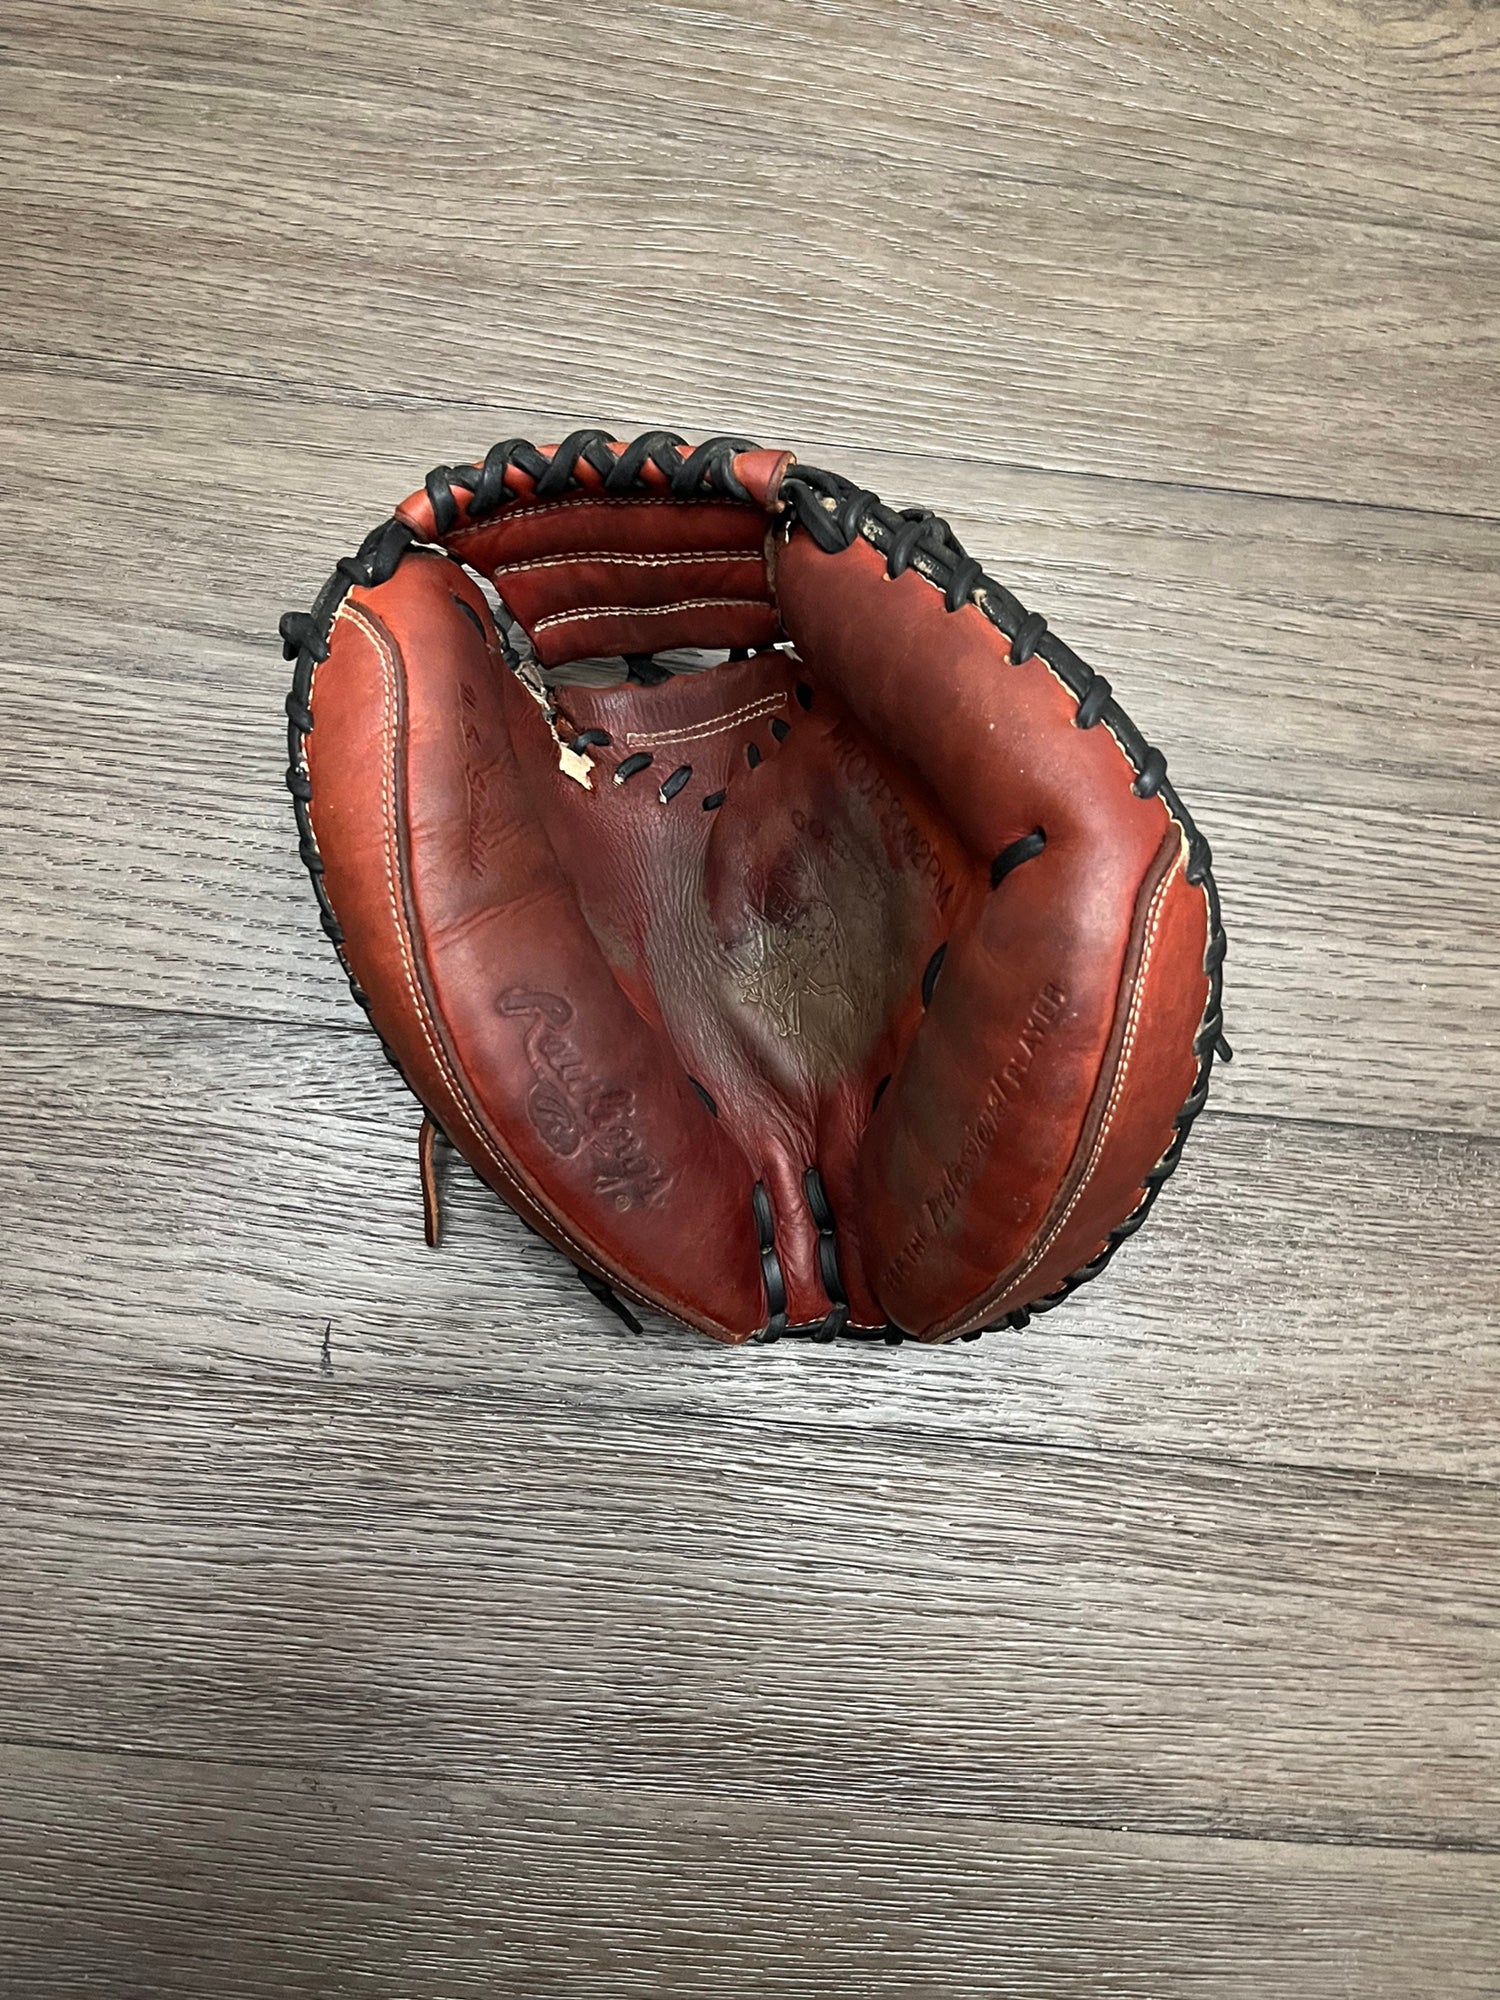 What Pros Wear: Salvador Perez' Rawlings Heart of the Hide PROSP13B  Catcher's Mitt - What Pros Wear